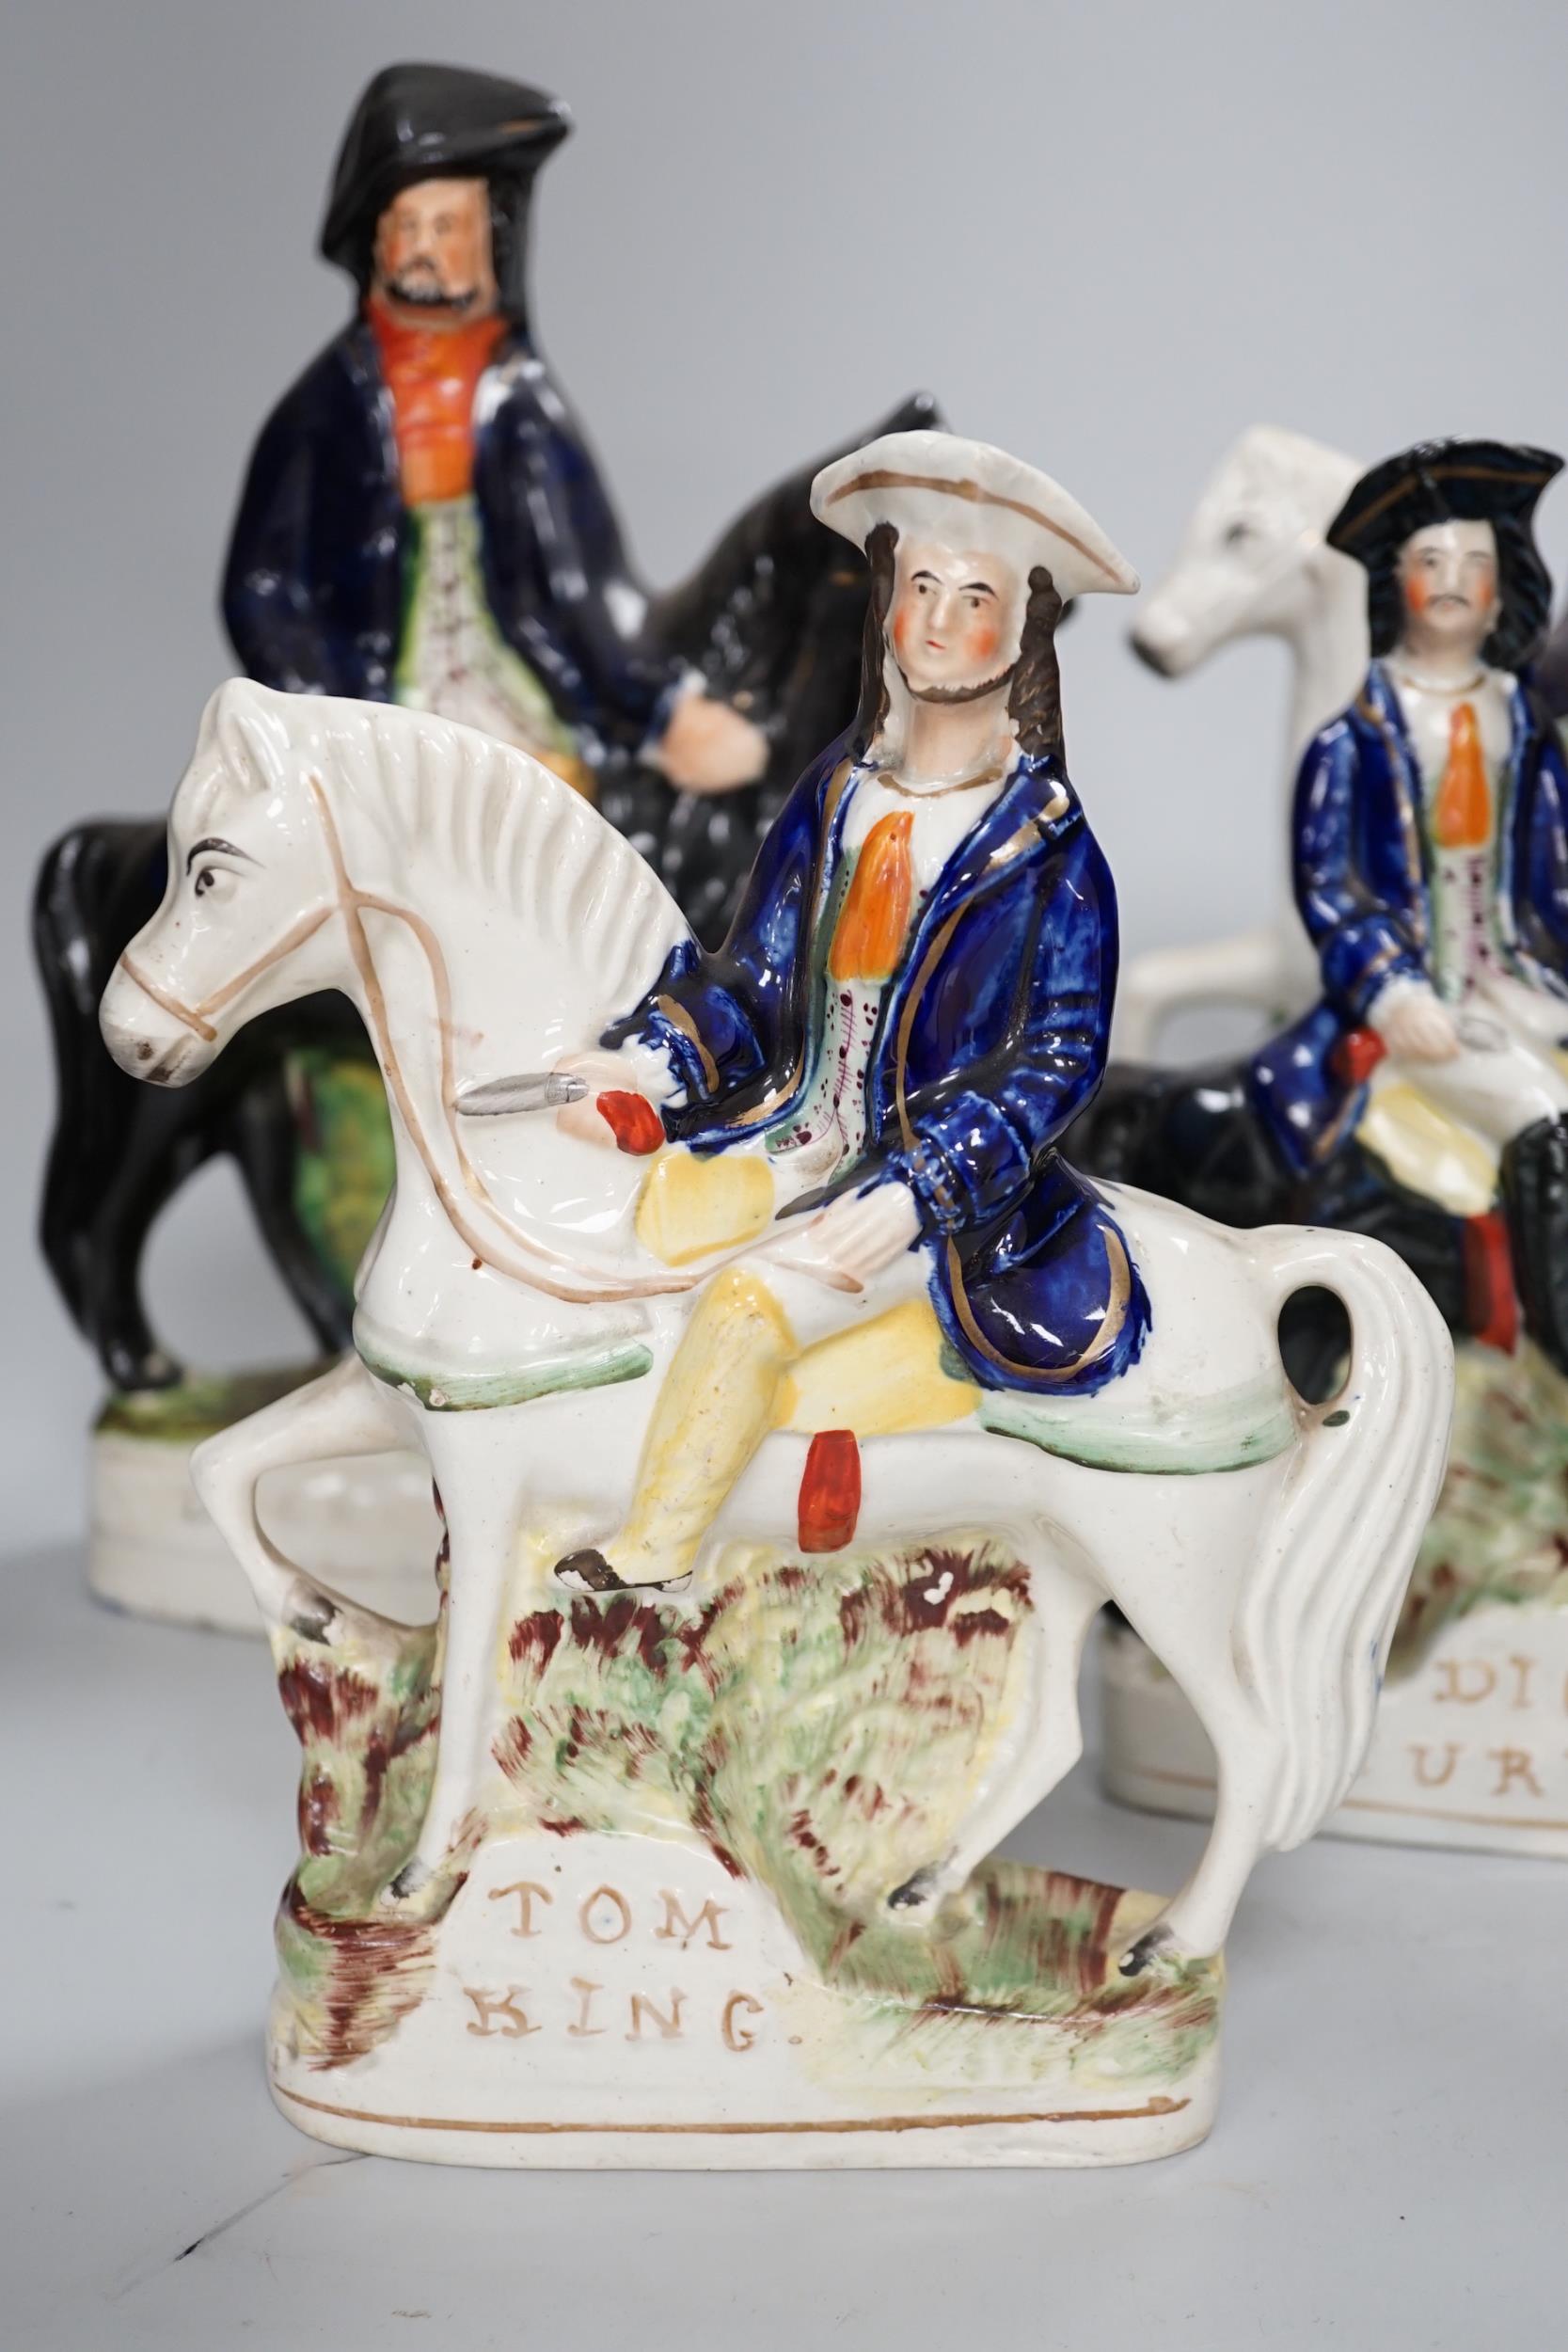 Four Staffordshire highwaymen figure groups of Tom King and Dick Turpin, the largest 30cm high - Image 3 of 7